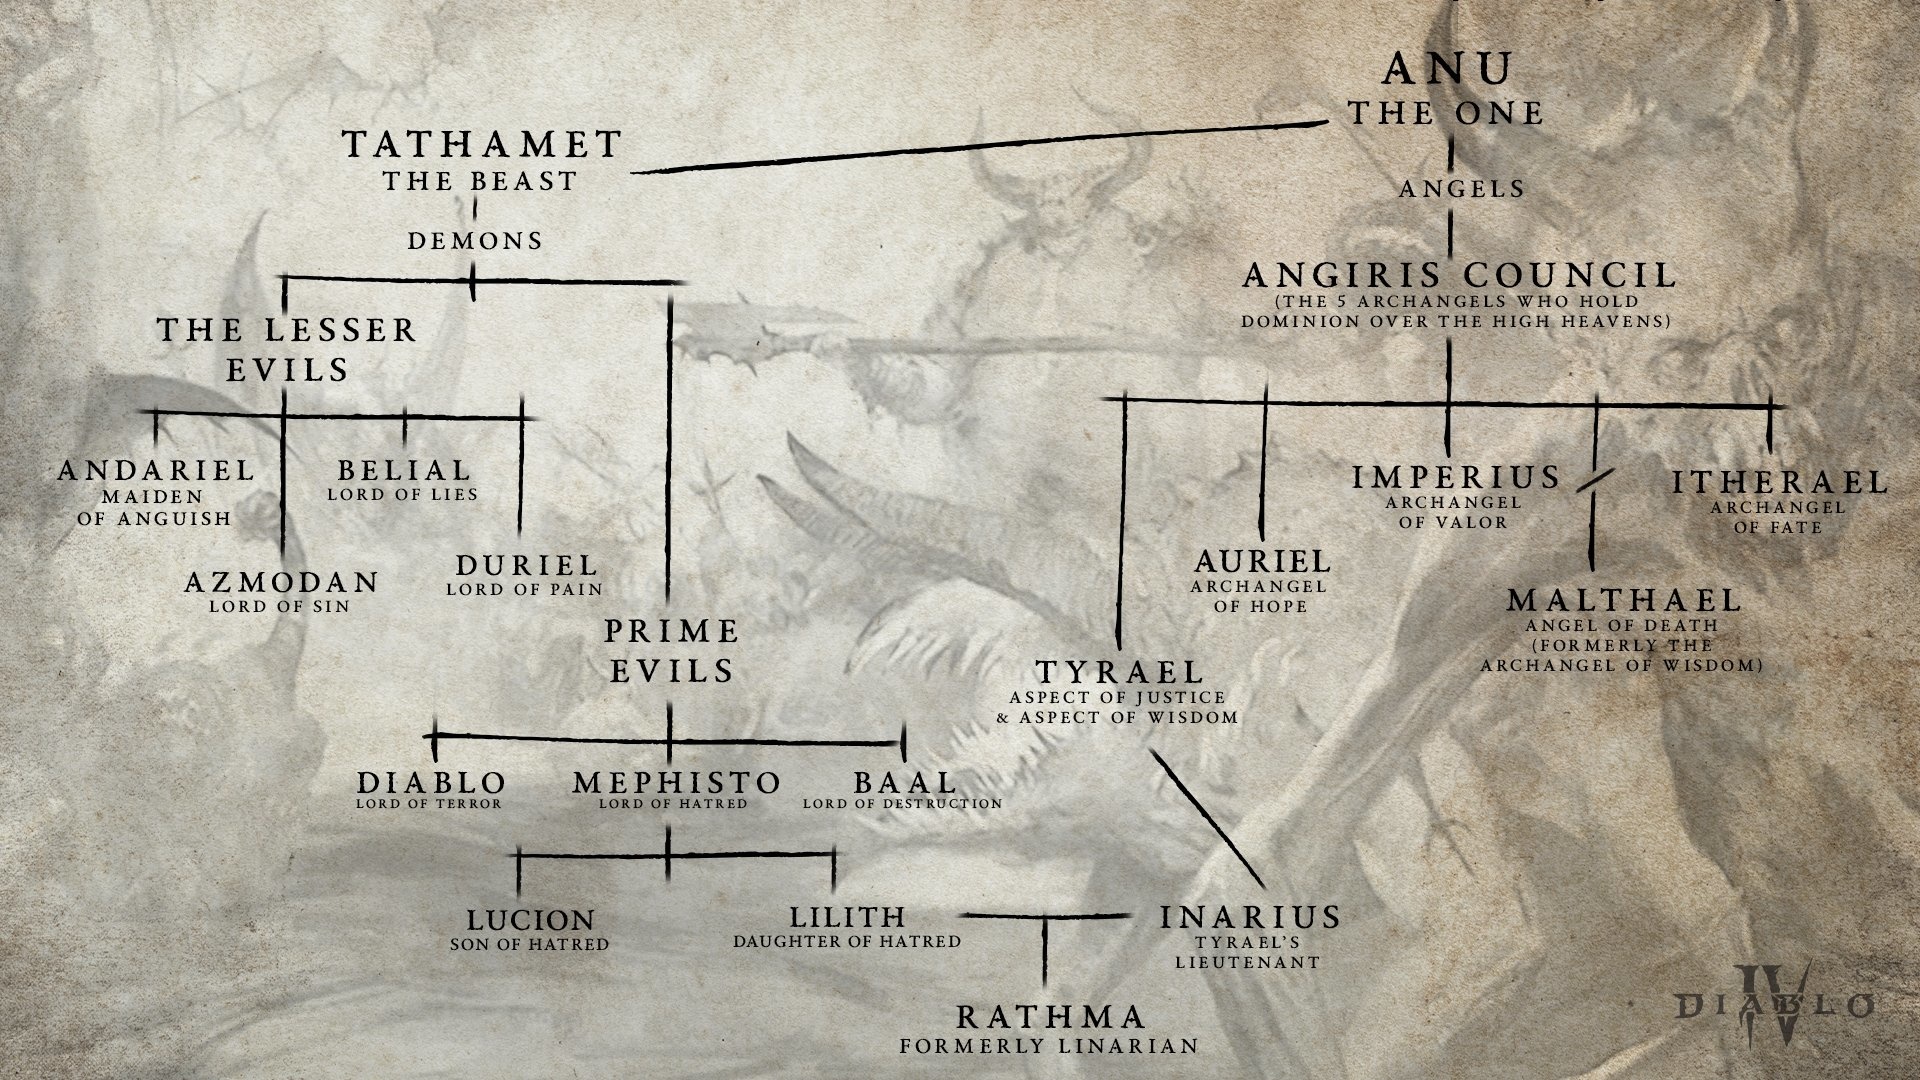 (Starting with the first being Anu, the family tree shows the angels and demons up to the son of Lilith and Inarius.)